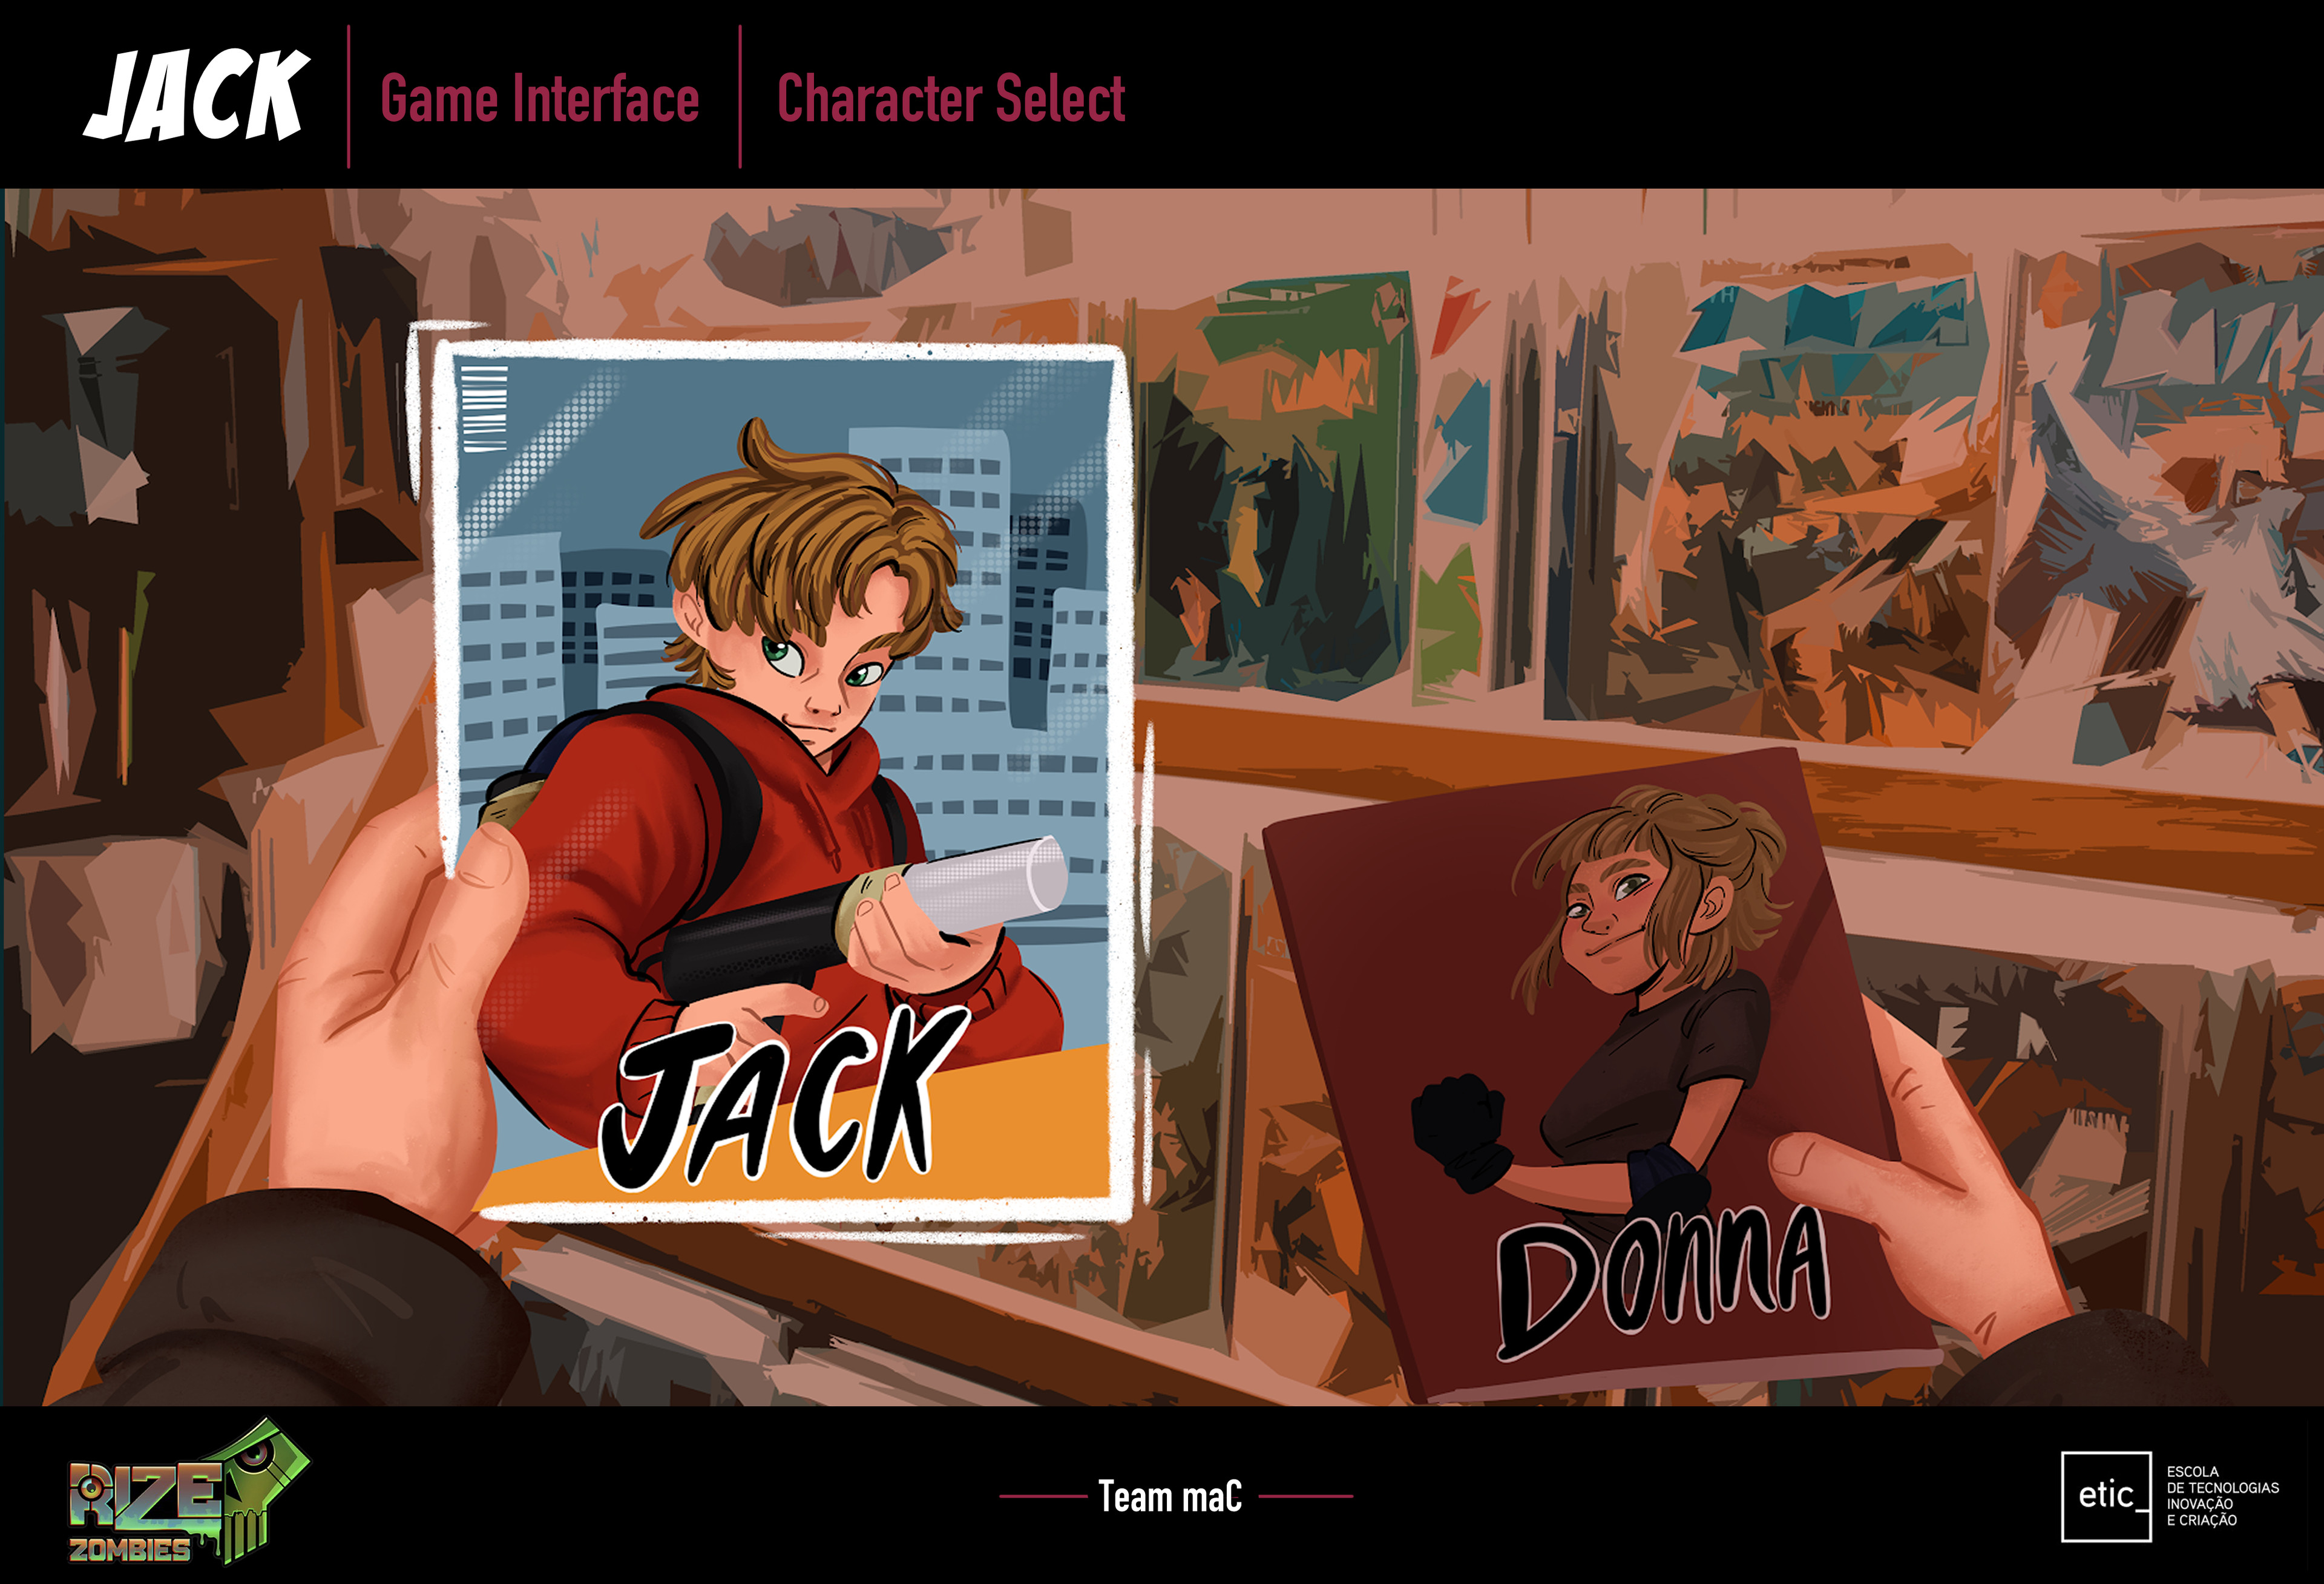 We made Jack a comic book fan, and we based the entire vibe of the game around it.